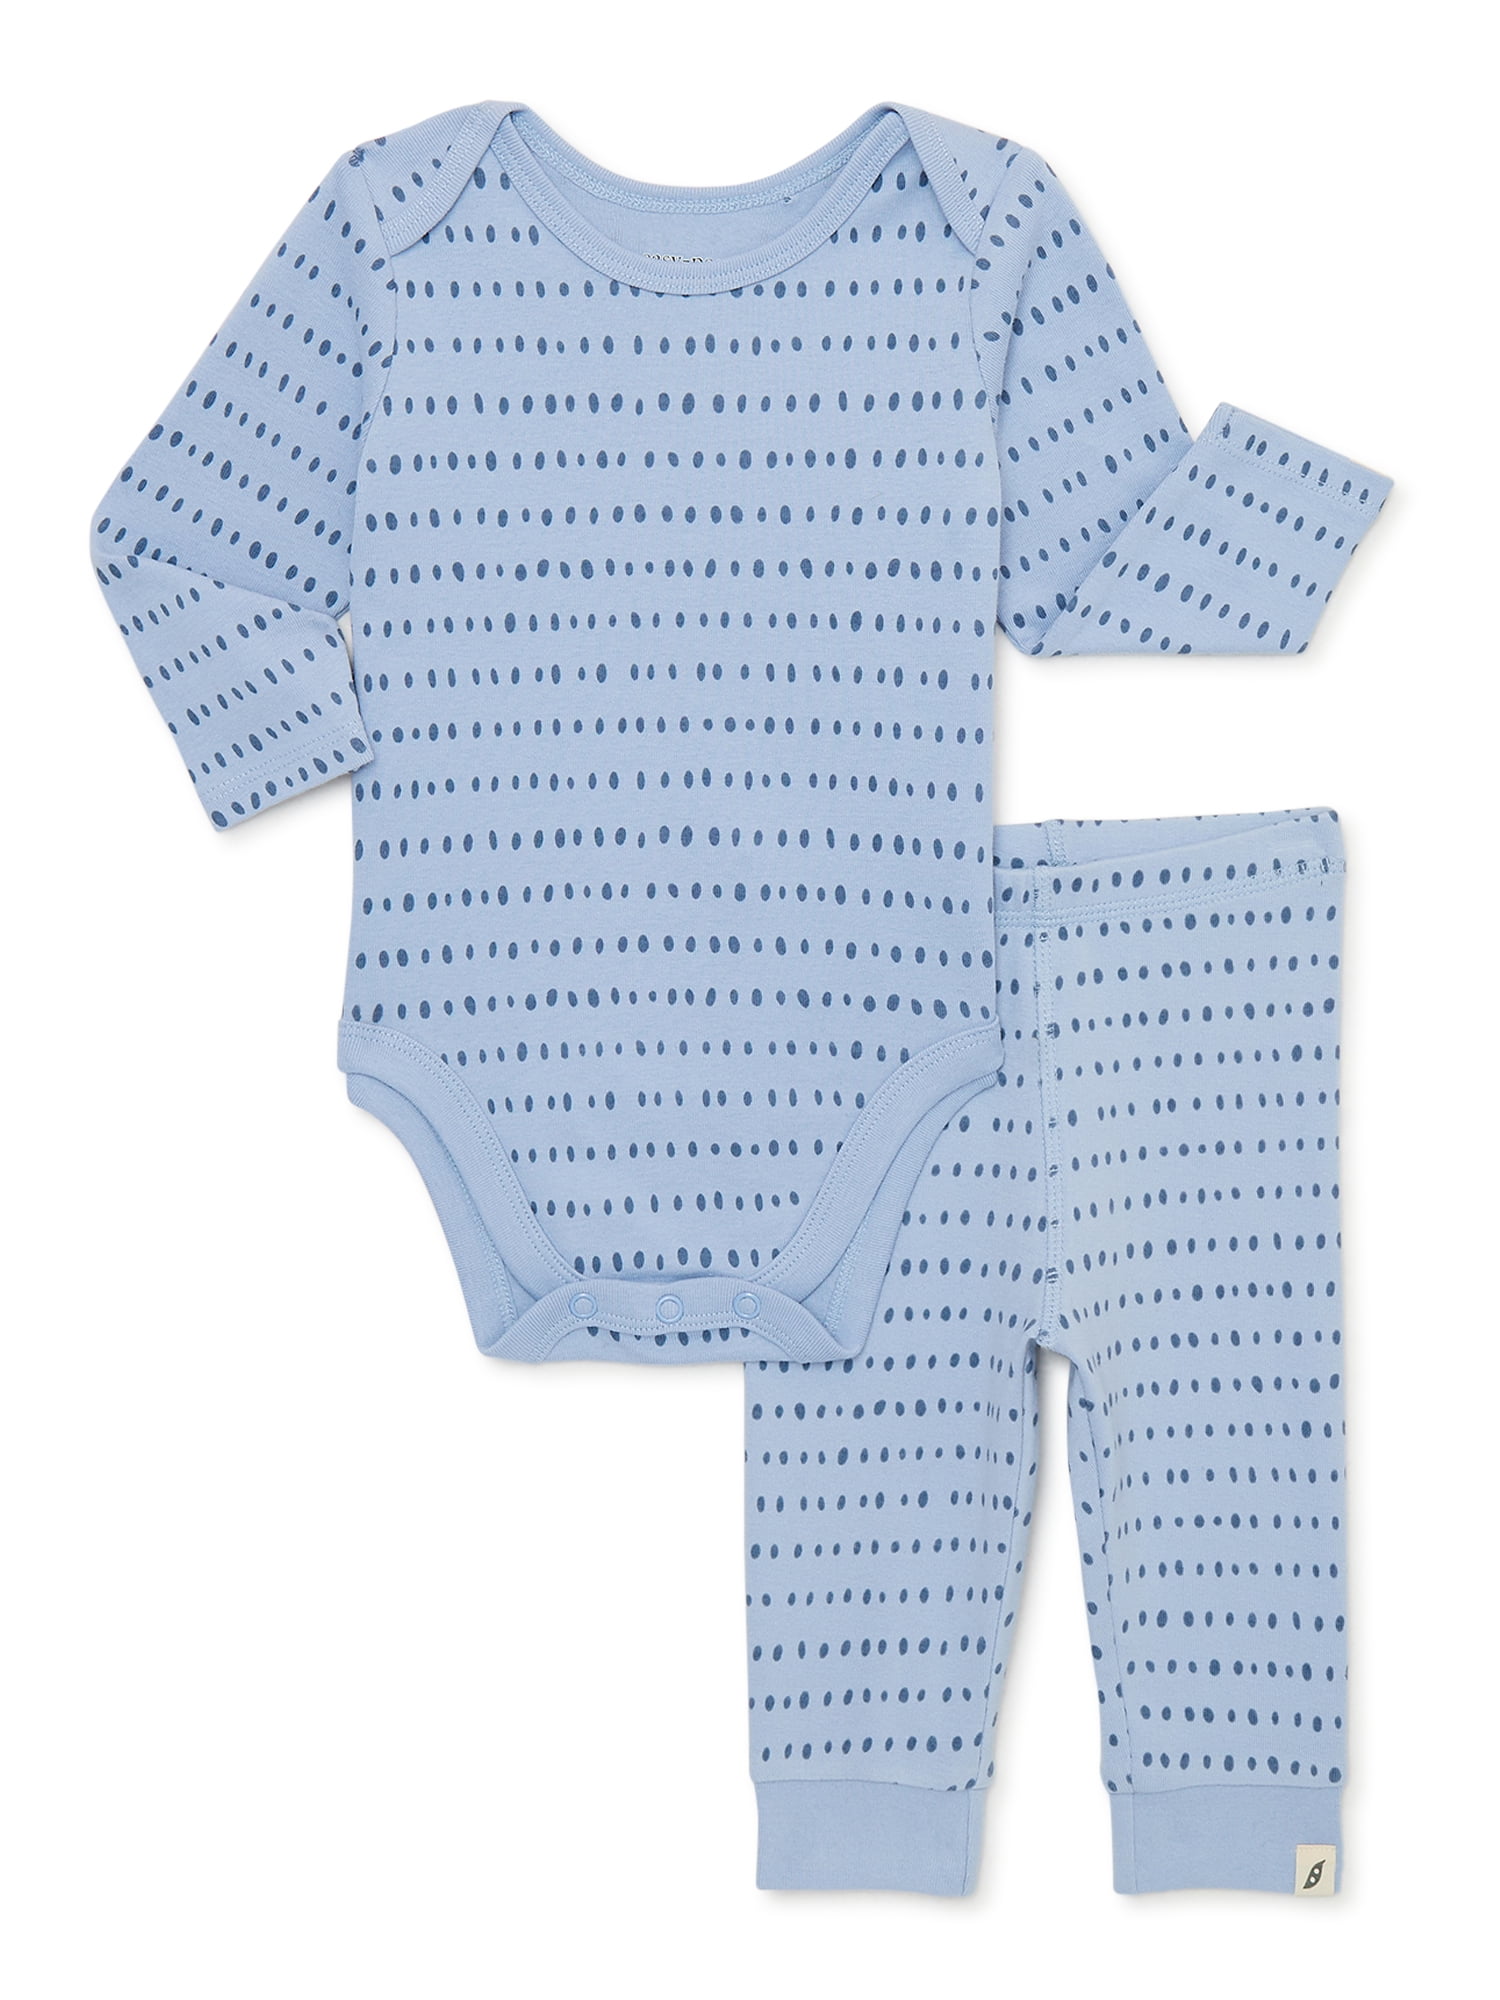 easy-peasy Baby Bodysuit and Jogger Pants Outfit Set, 2-Piece, Sizes 0/ ...